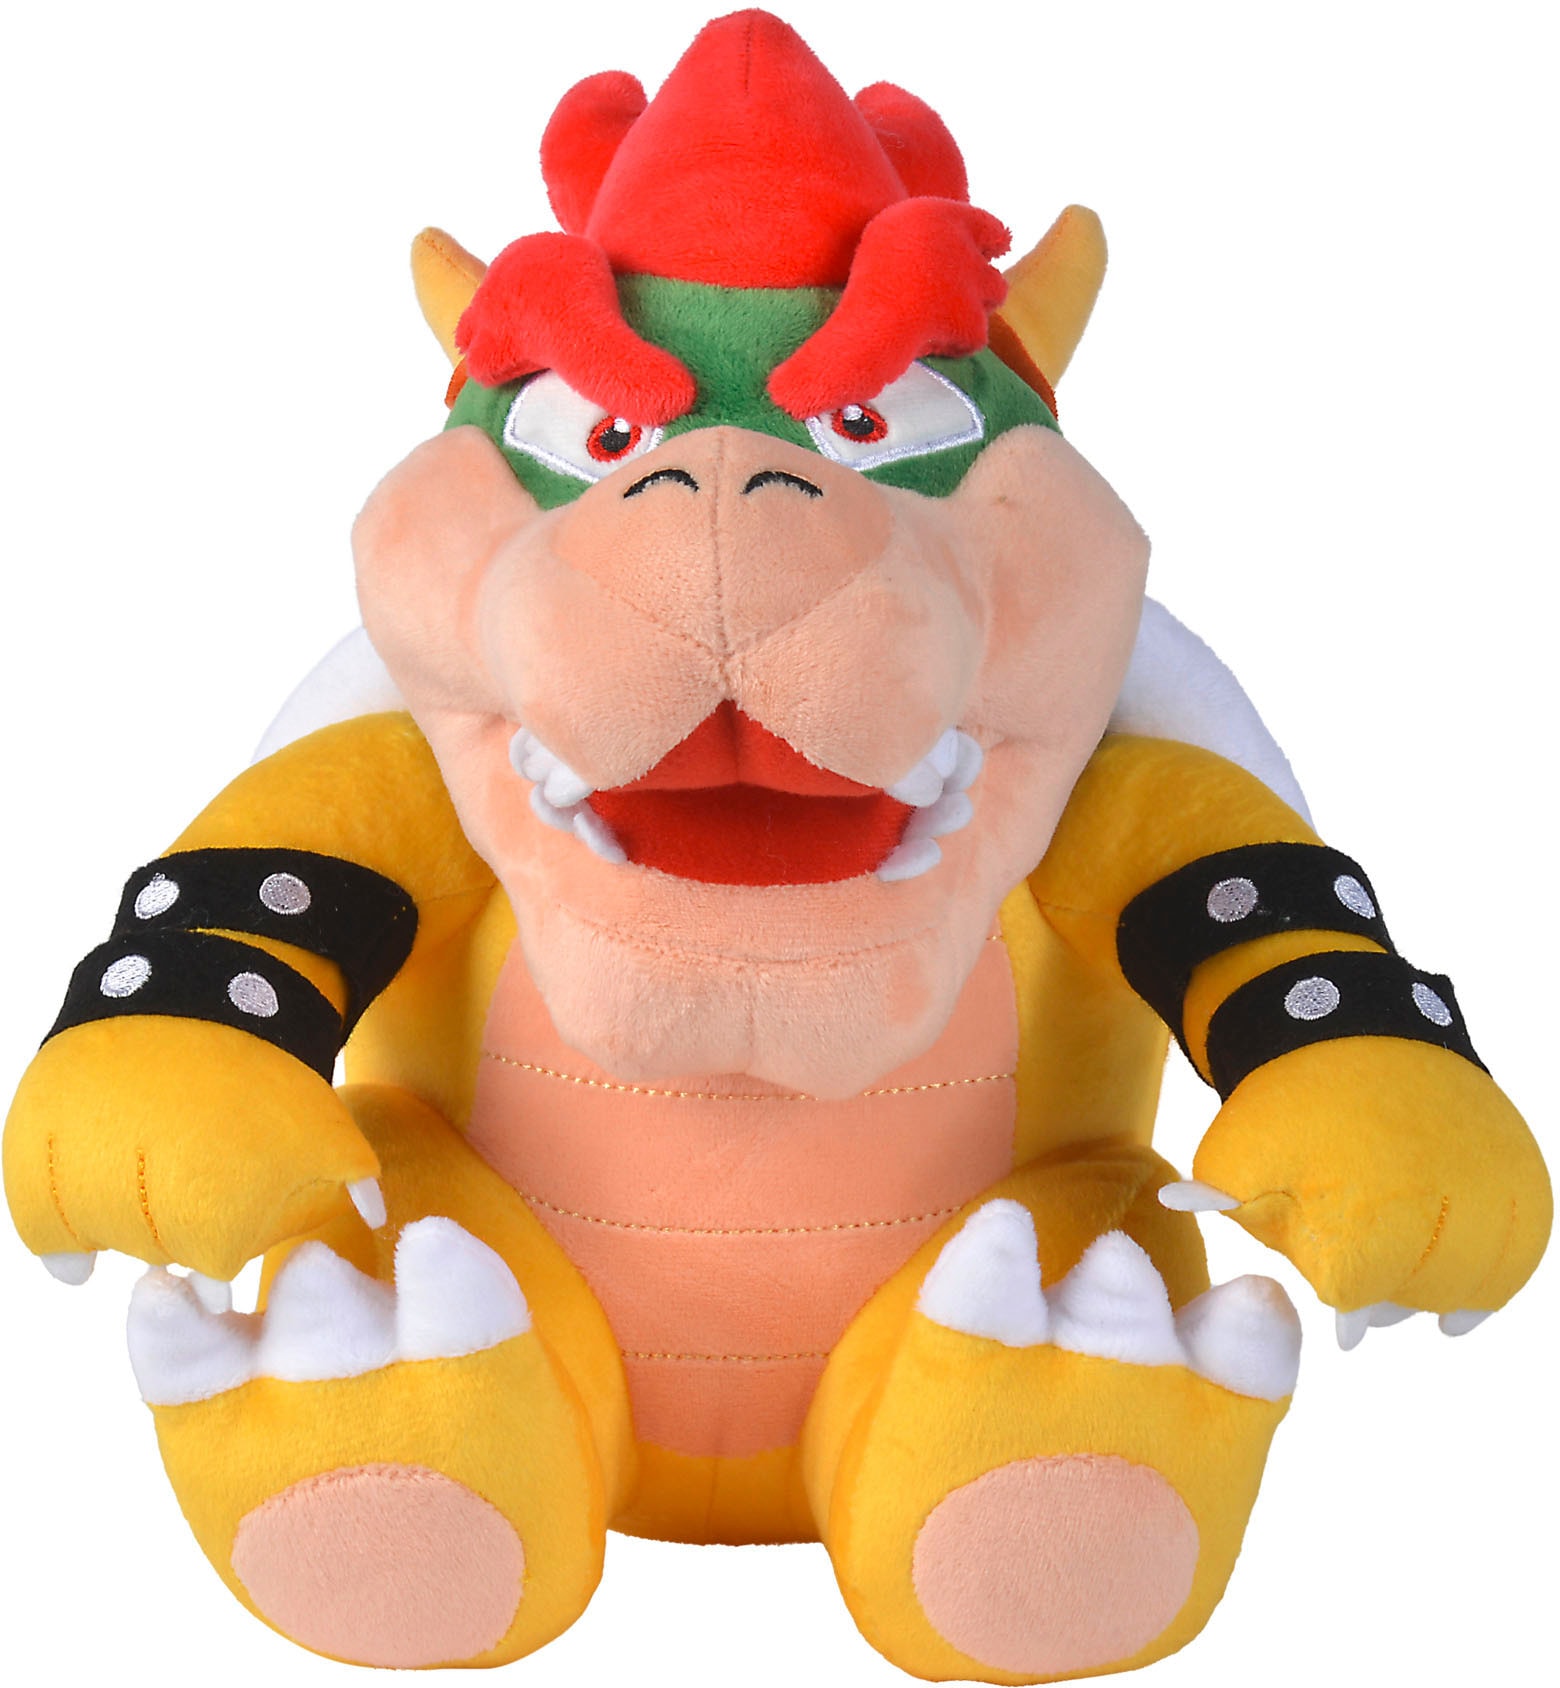 Simba 109231532 Super Mario Bowser, 27 cm Plush Figure, Suitable from The  First Months of Life